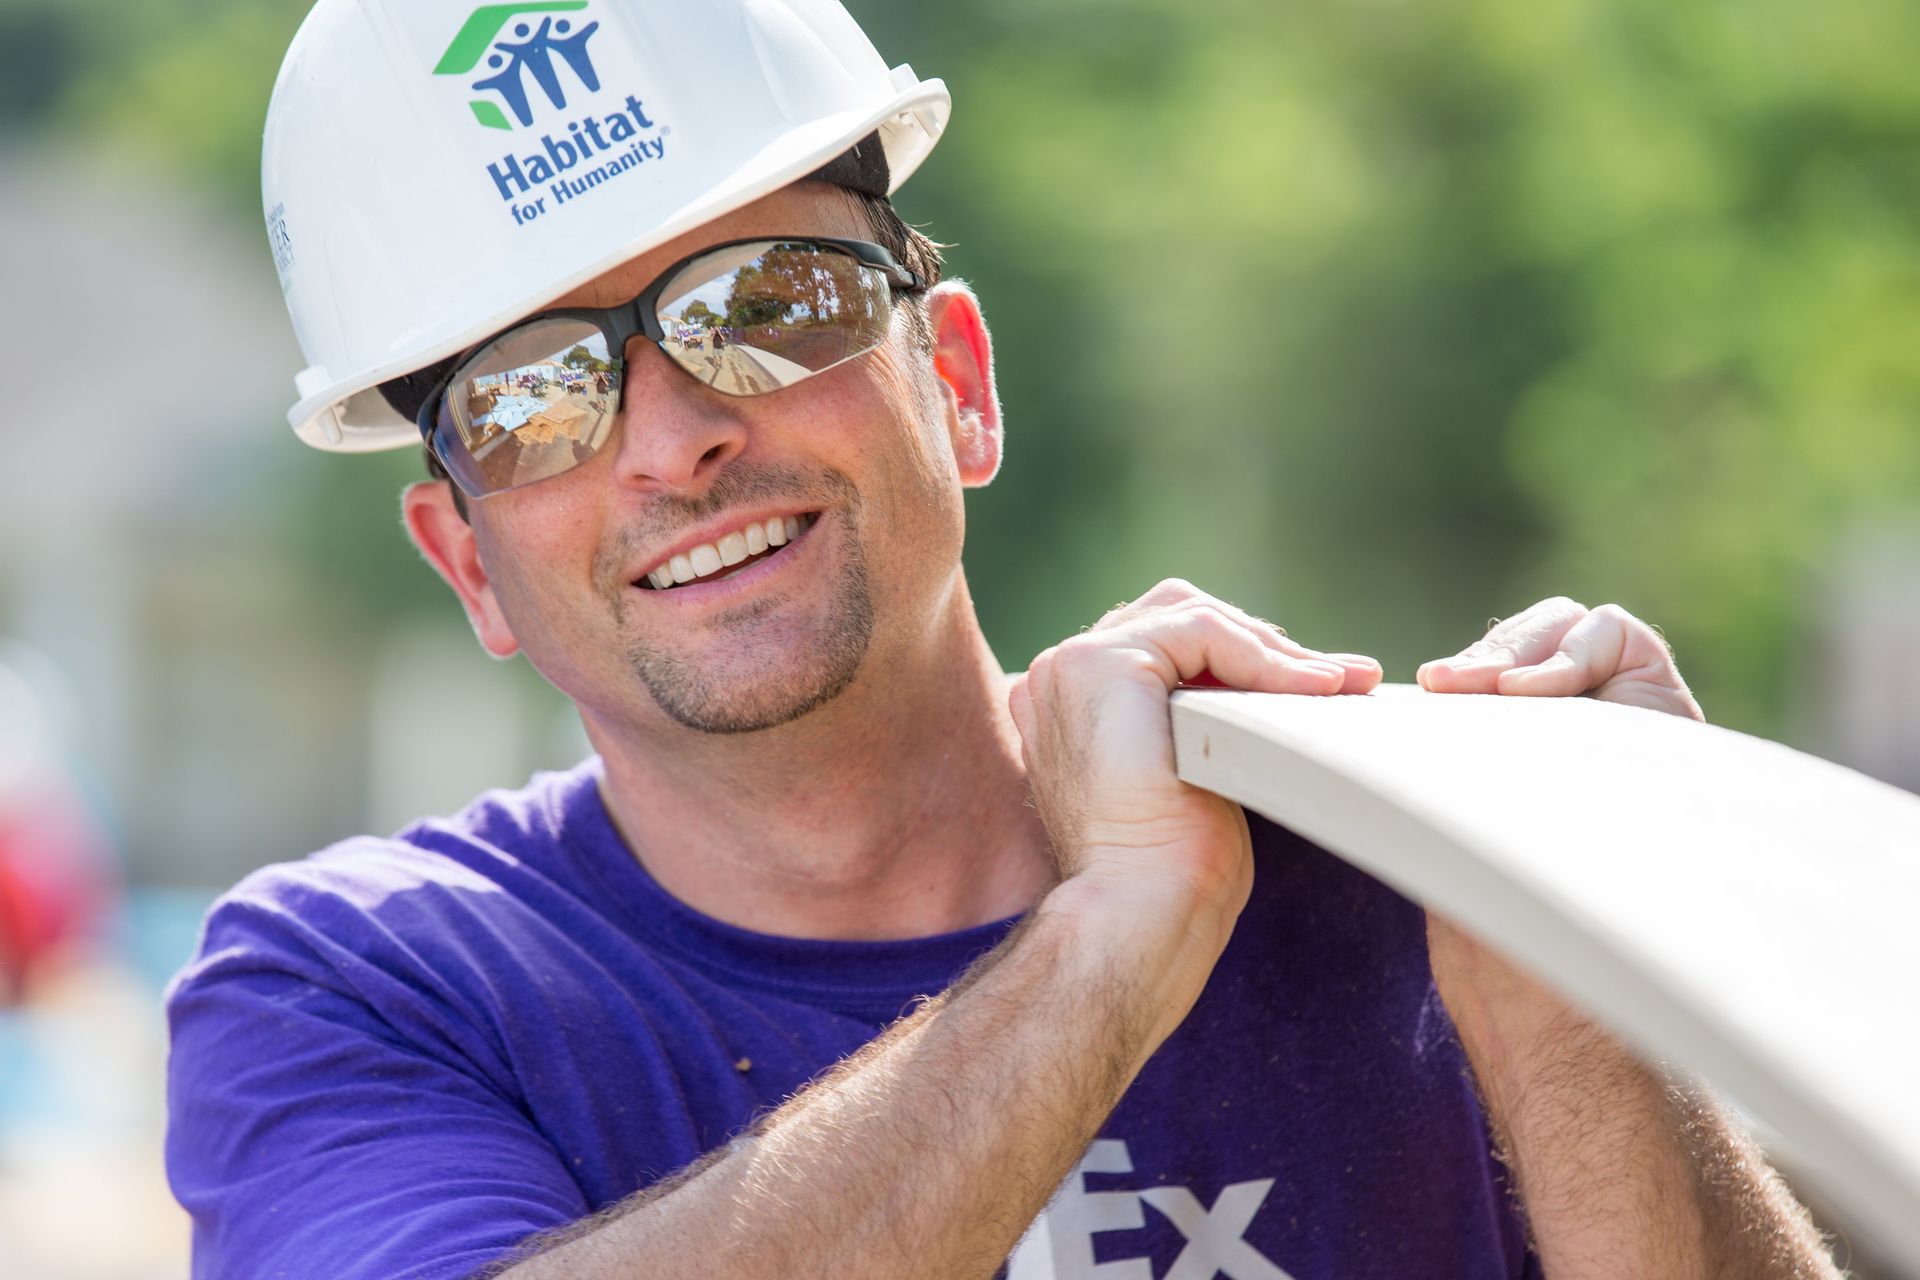 Habitat for Humanity volunteer, building a world where everyone has a safe and affordable place to live.